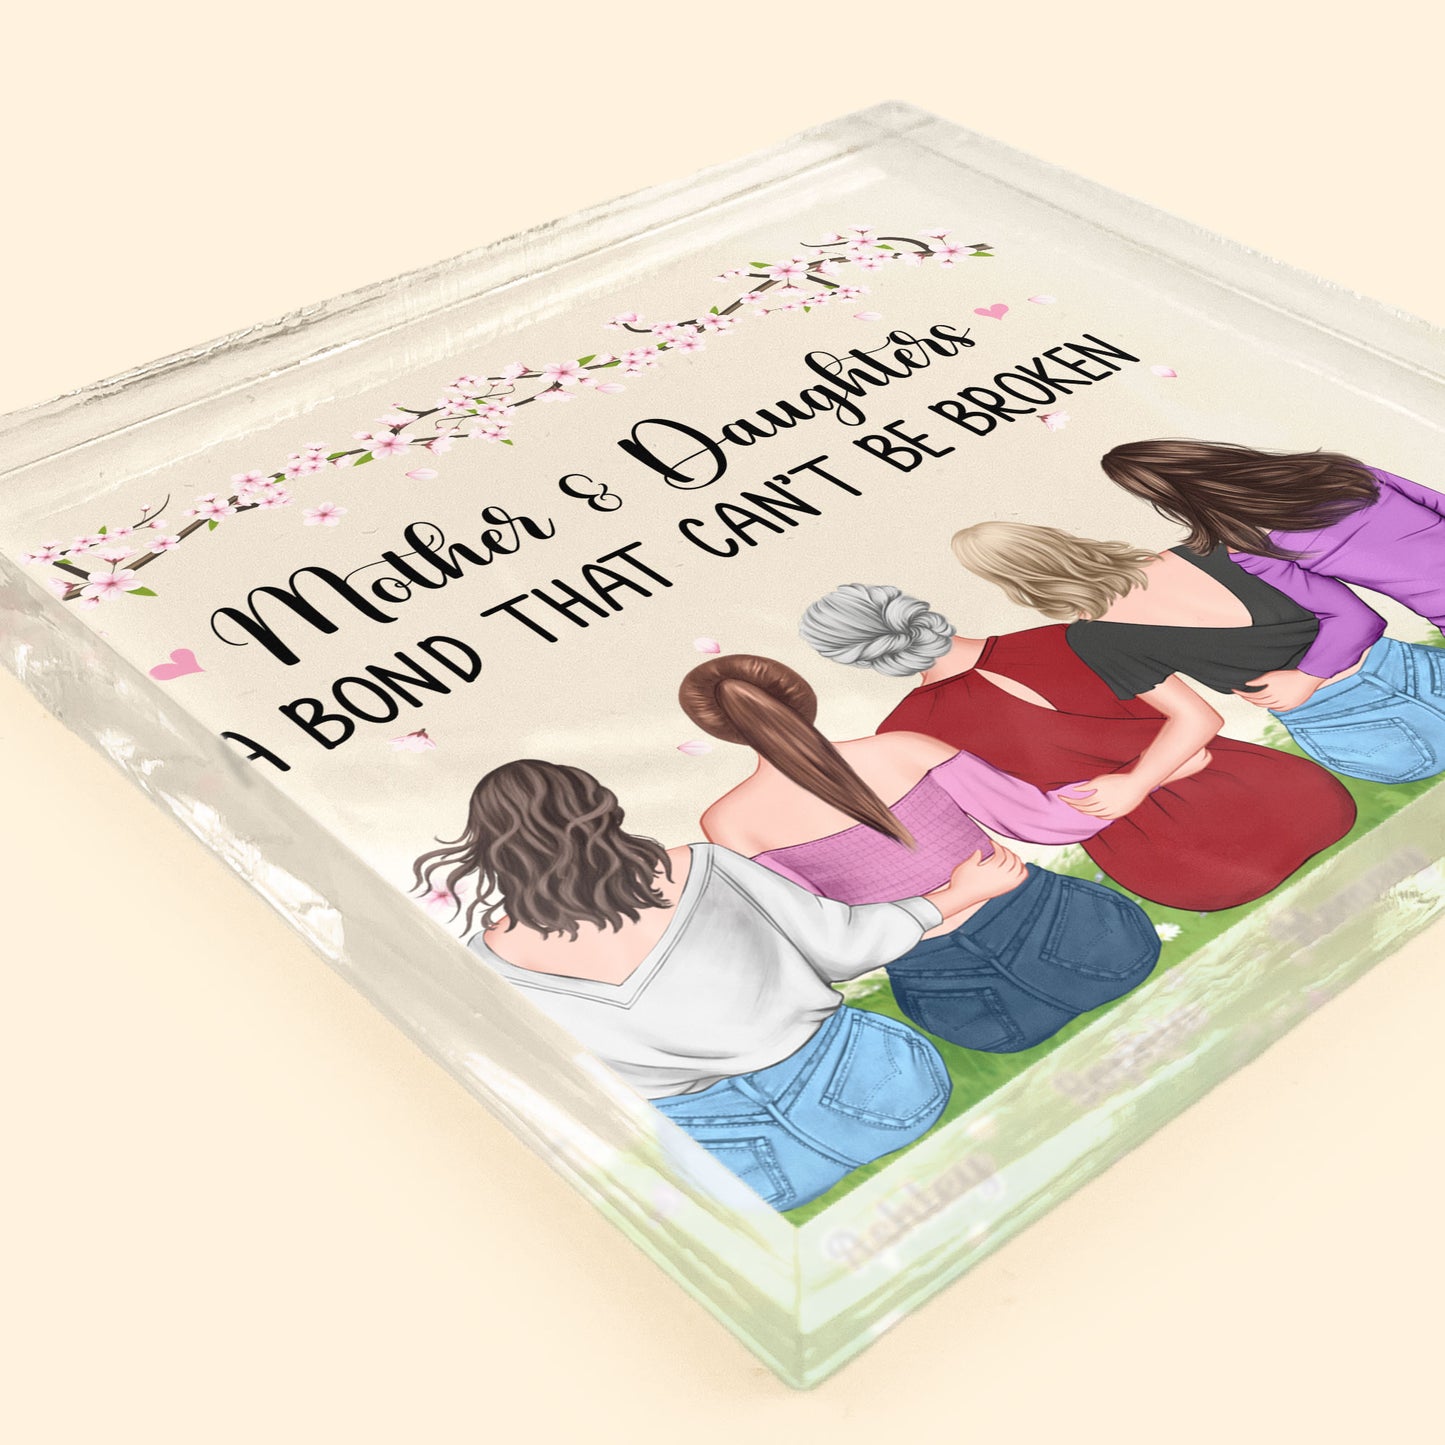 Mother Daughters A Bond That Can't Be Broken - Personalized Acrylic Plaque